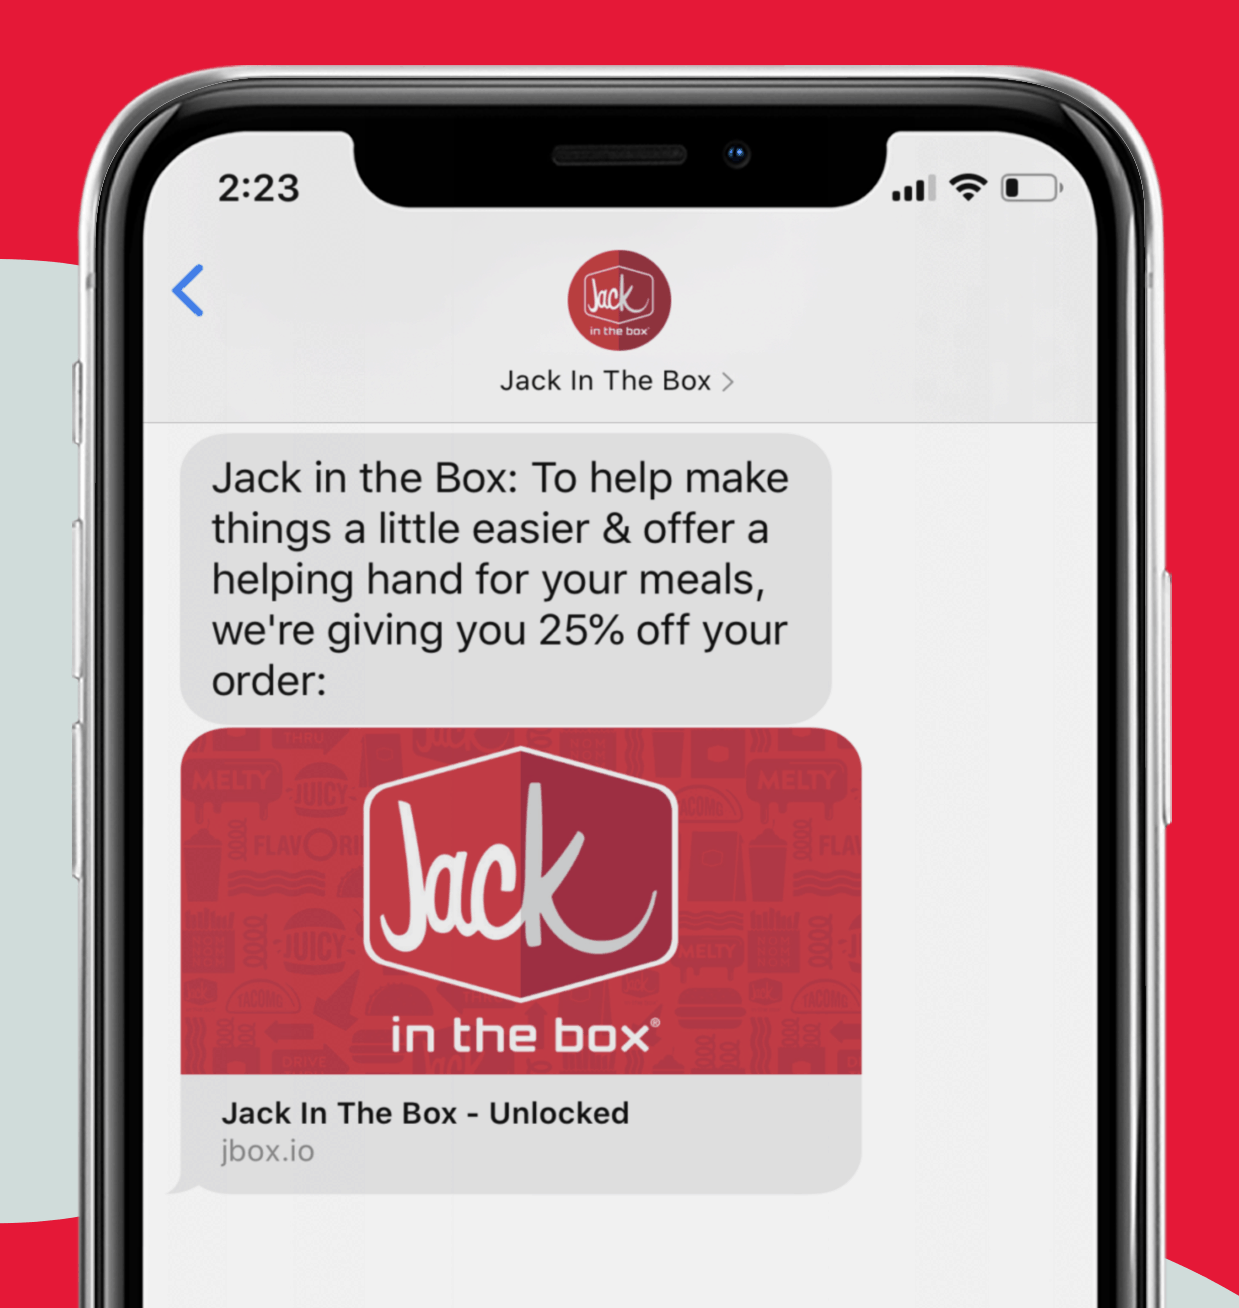 Jack in the Box SMS Marketing Example for Restaurants